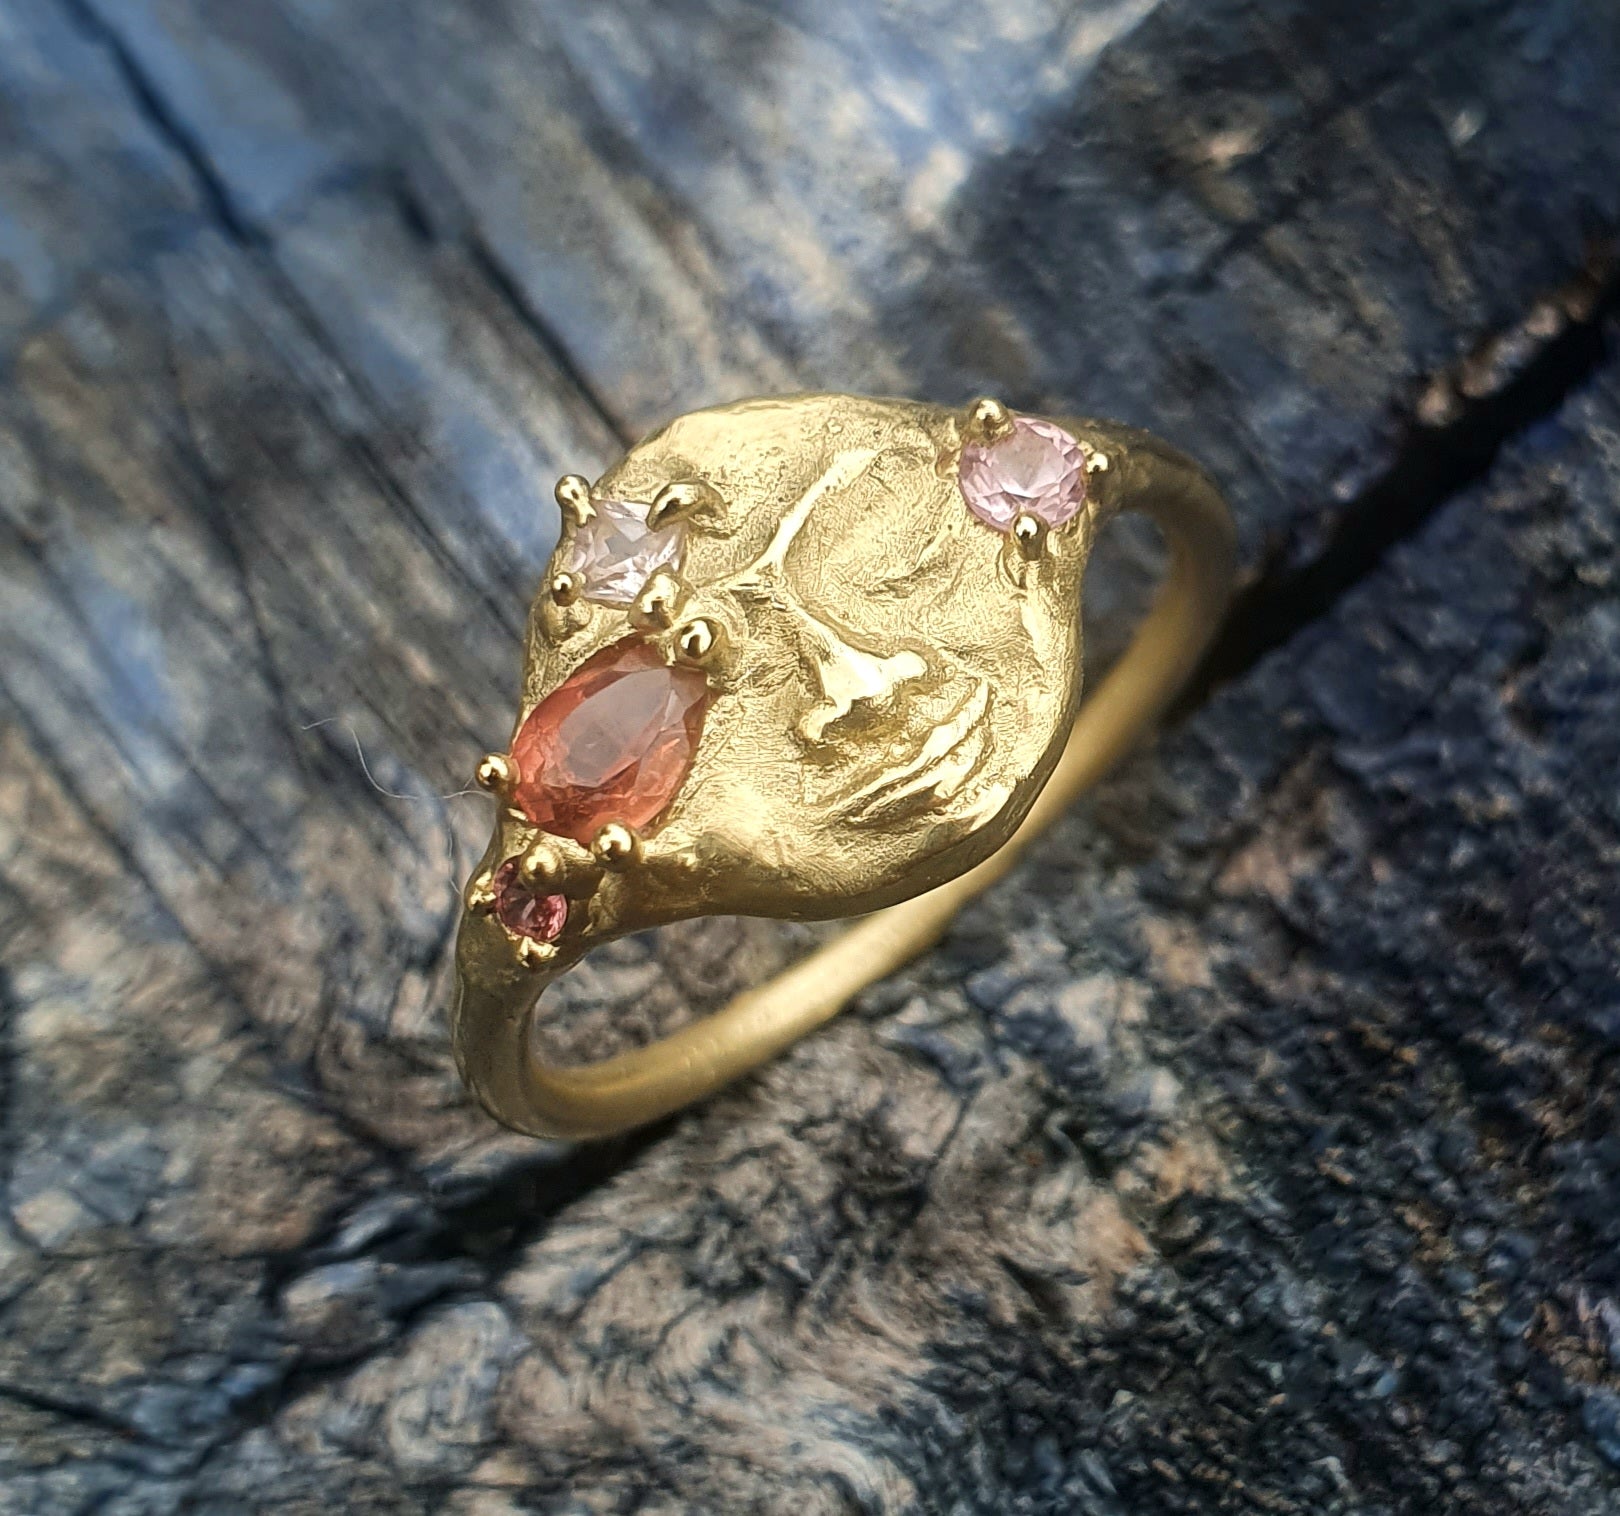 Sulis, sun goddess - 9k gold and pink sapphire signet ring